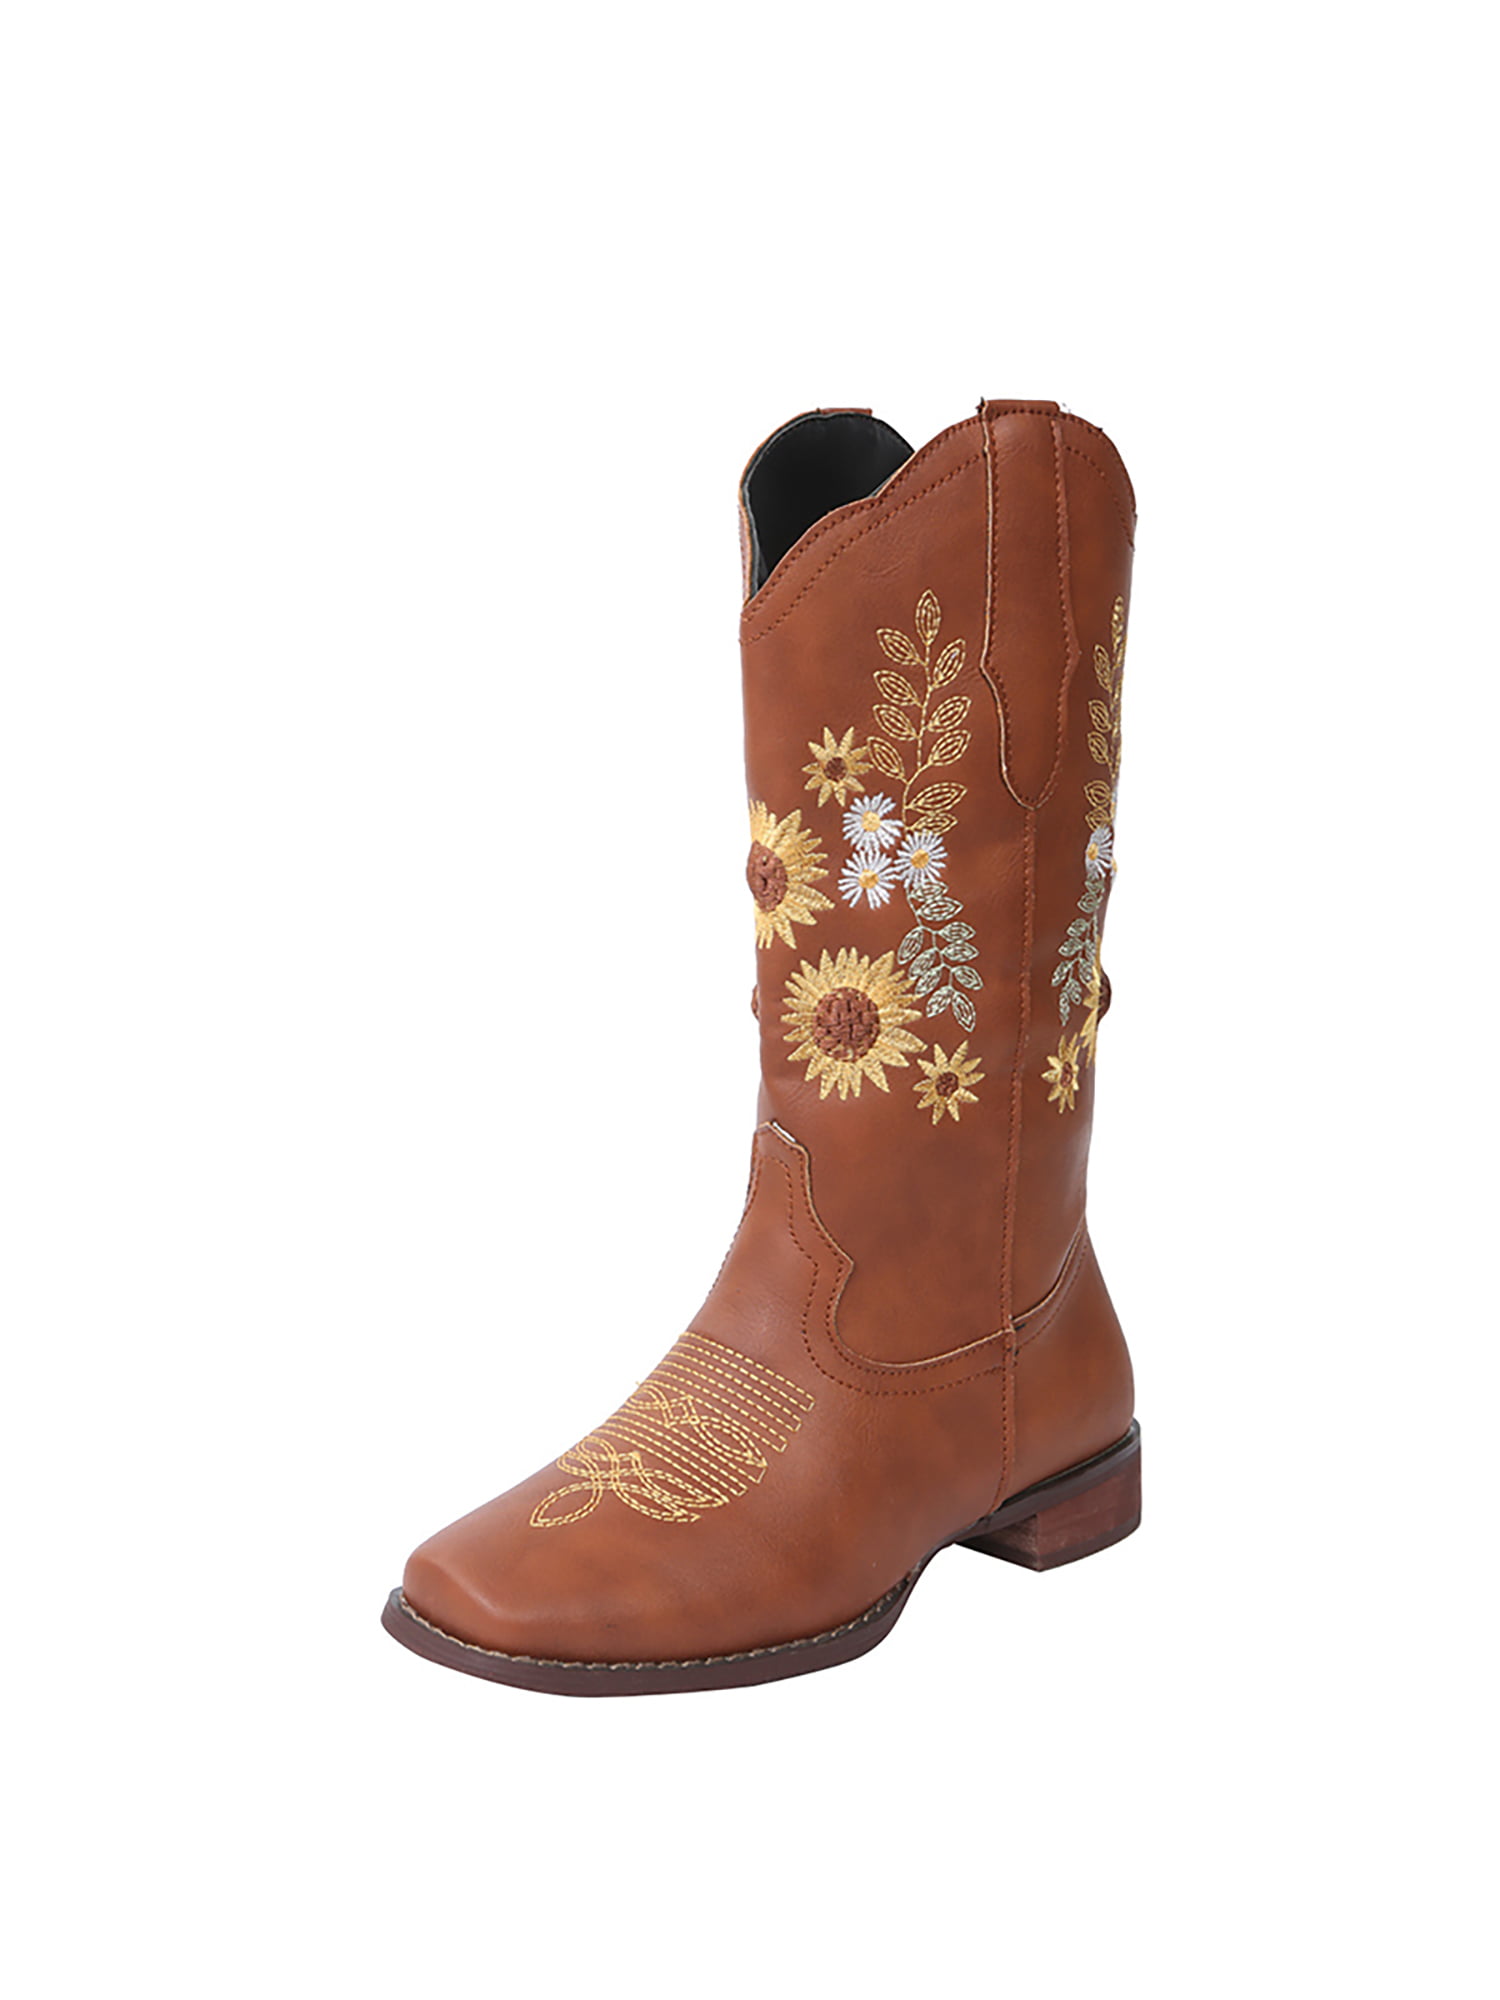 SIMANLAN Ladies Western Fashion Square Toe For Faux Mid Calf Cowgirl Shoes Red-brown 6.5 - Walmart.com